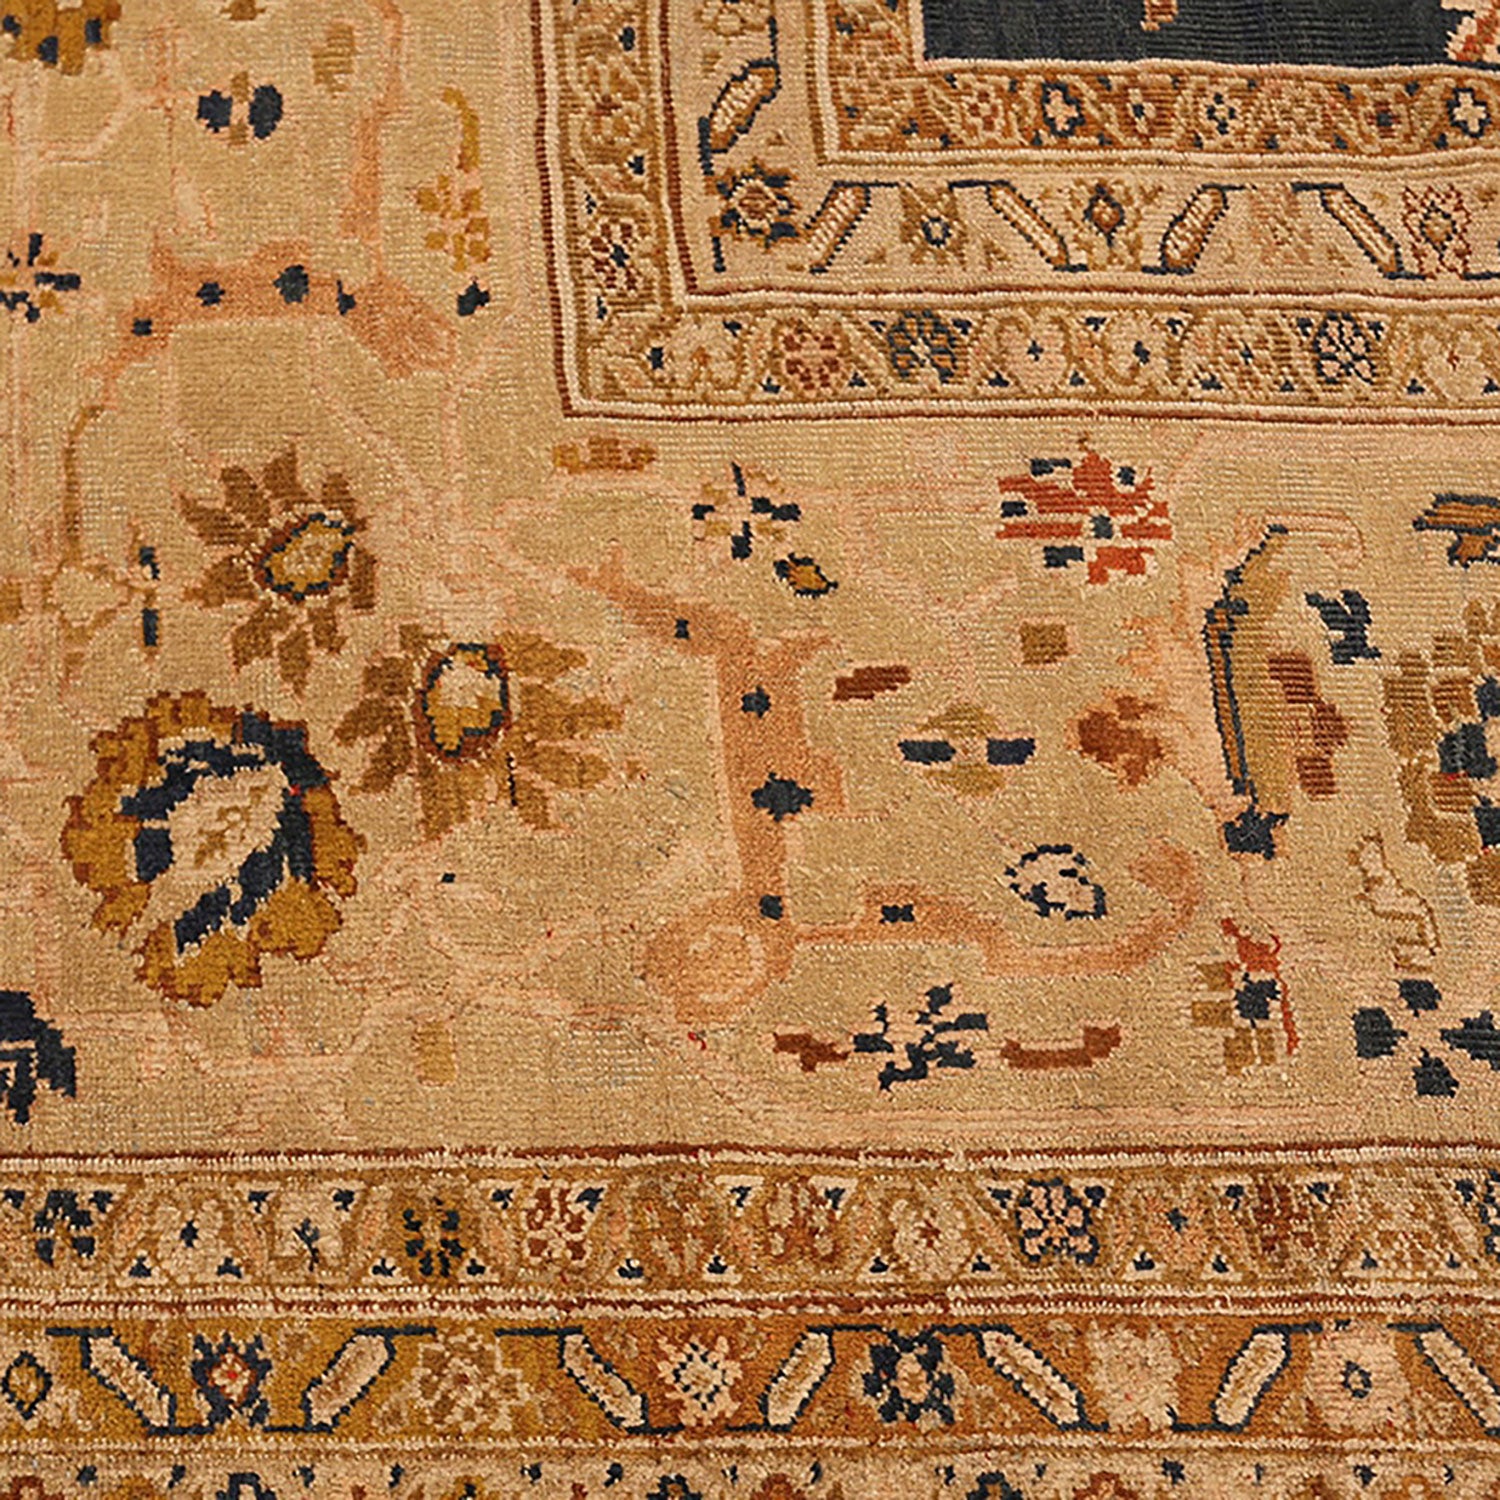 Intricate and detailed, a traditional rug with floral motifs.